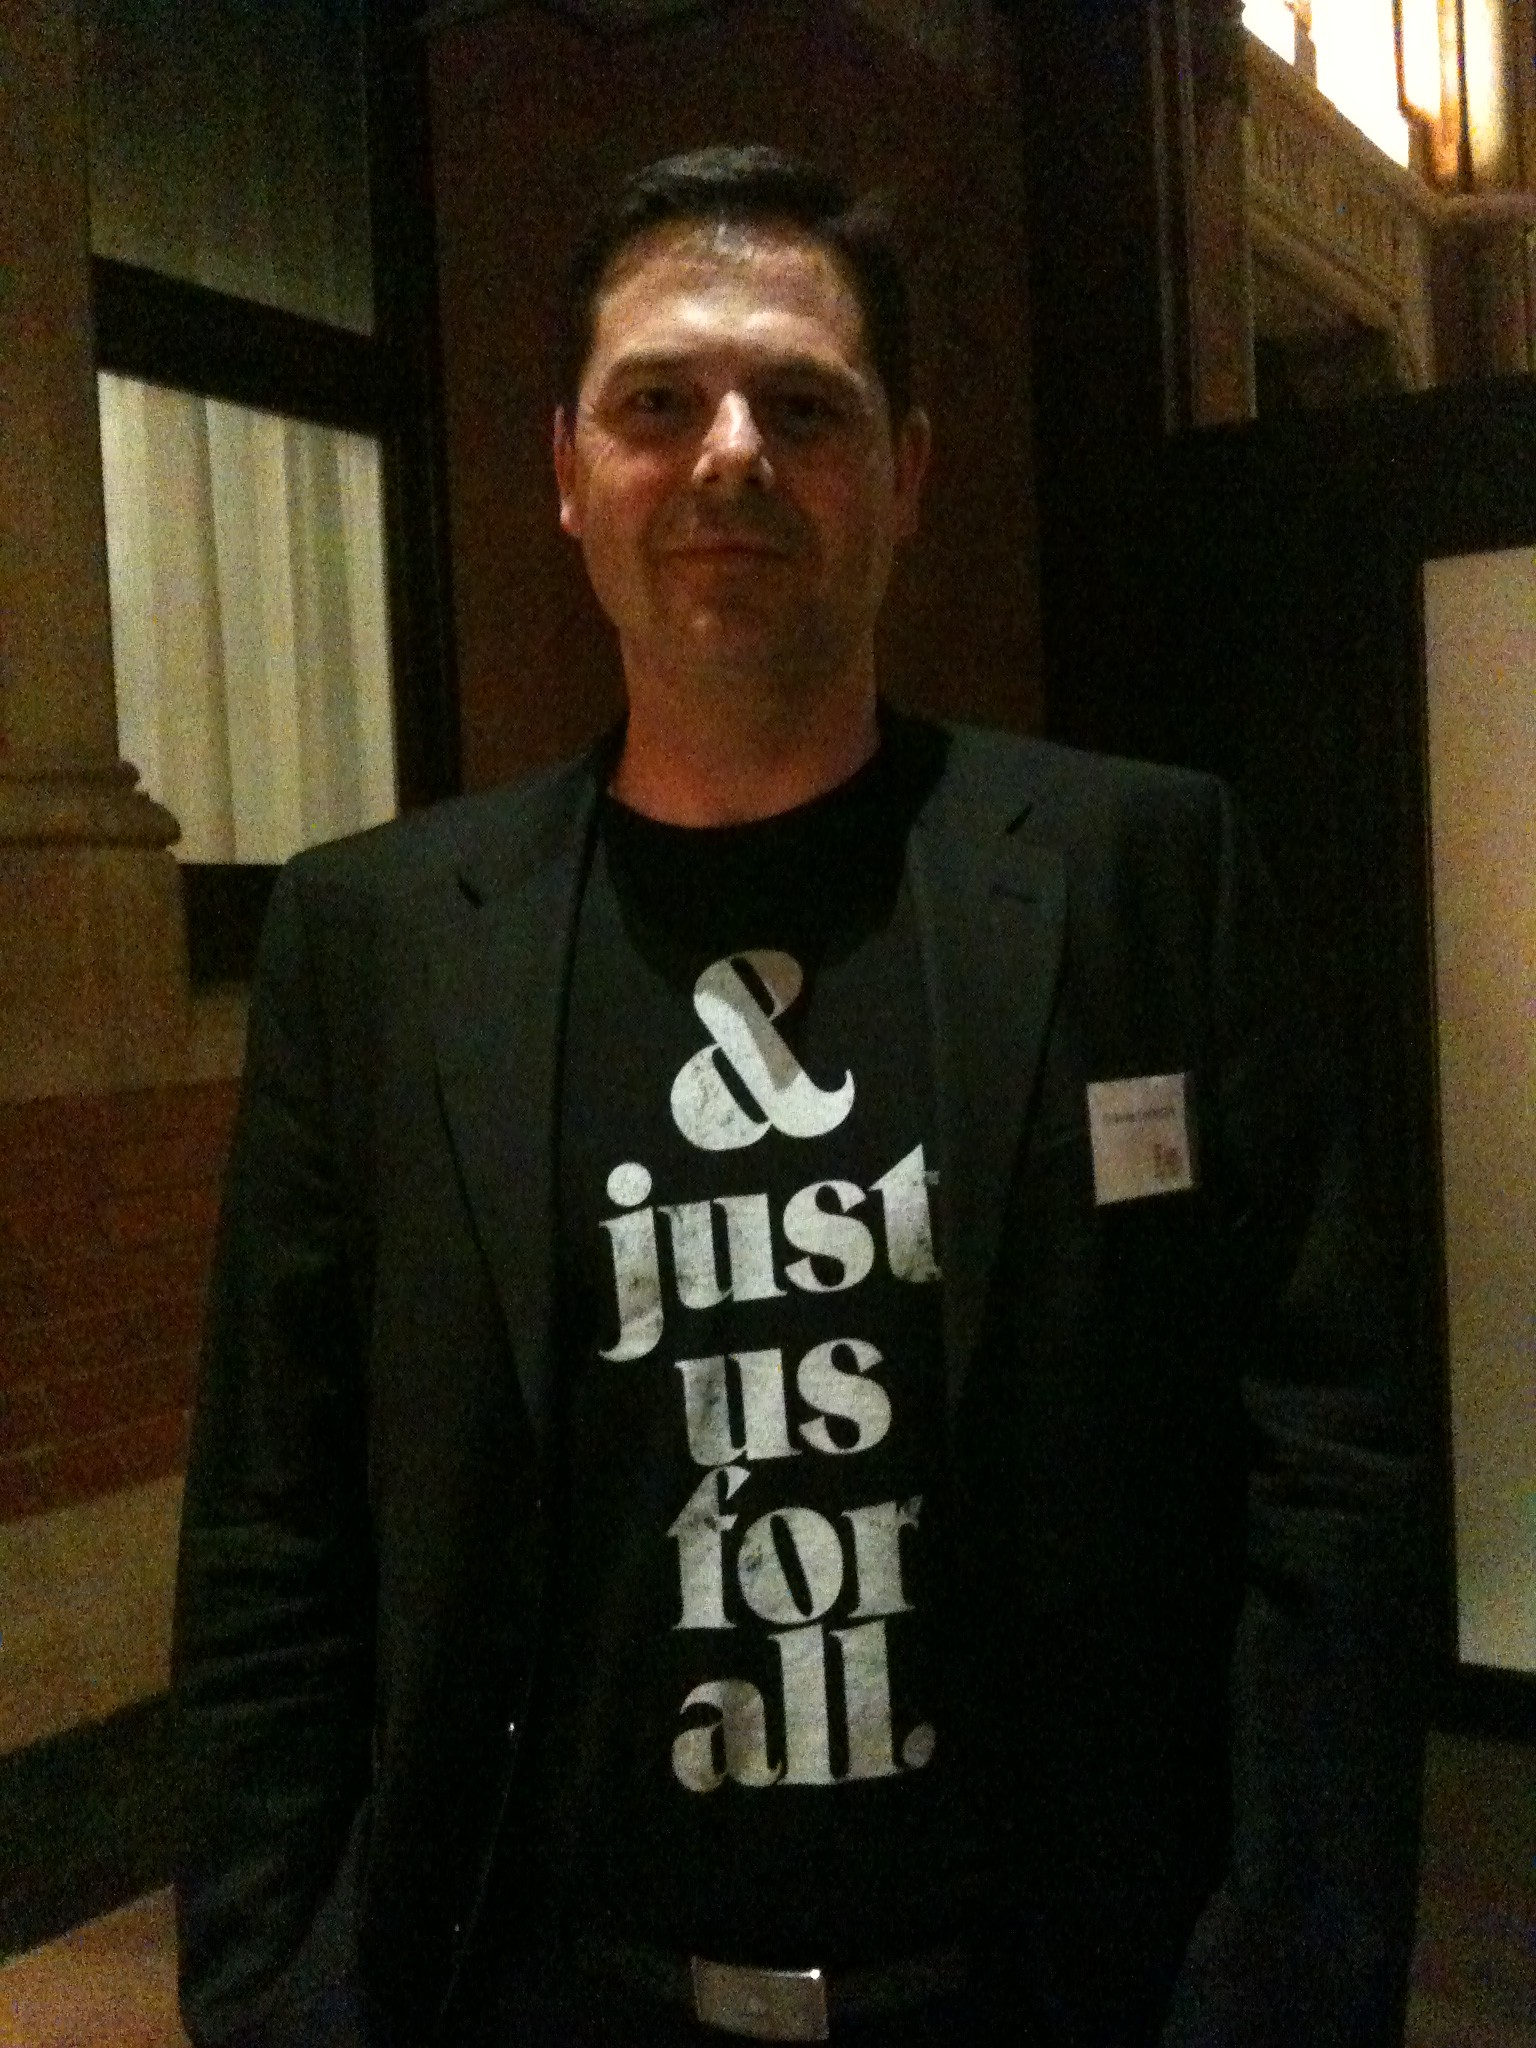 Graeme in And just us for all t-shirt